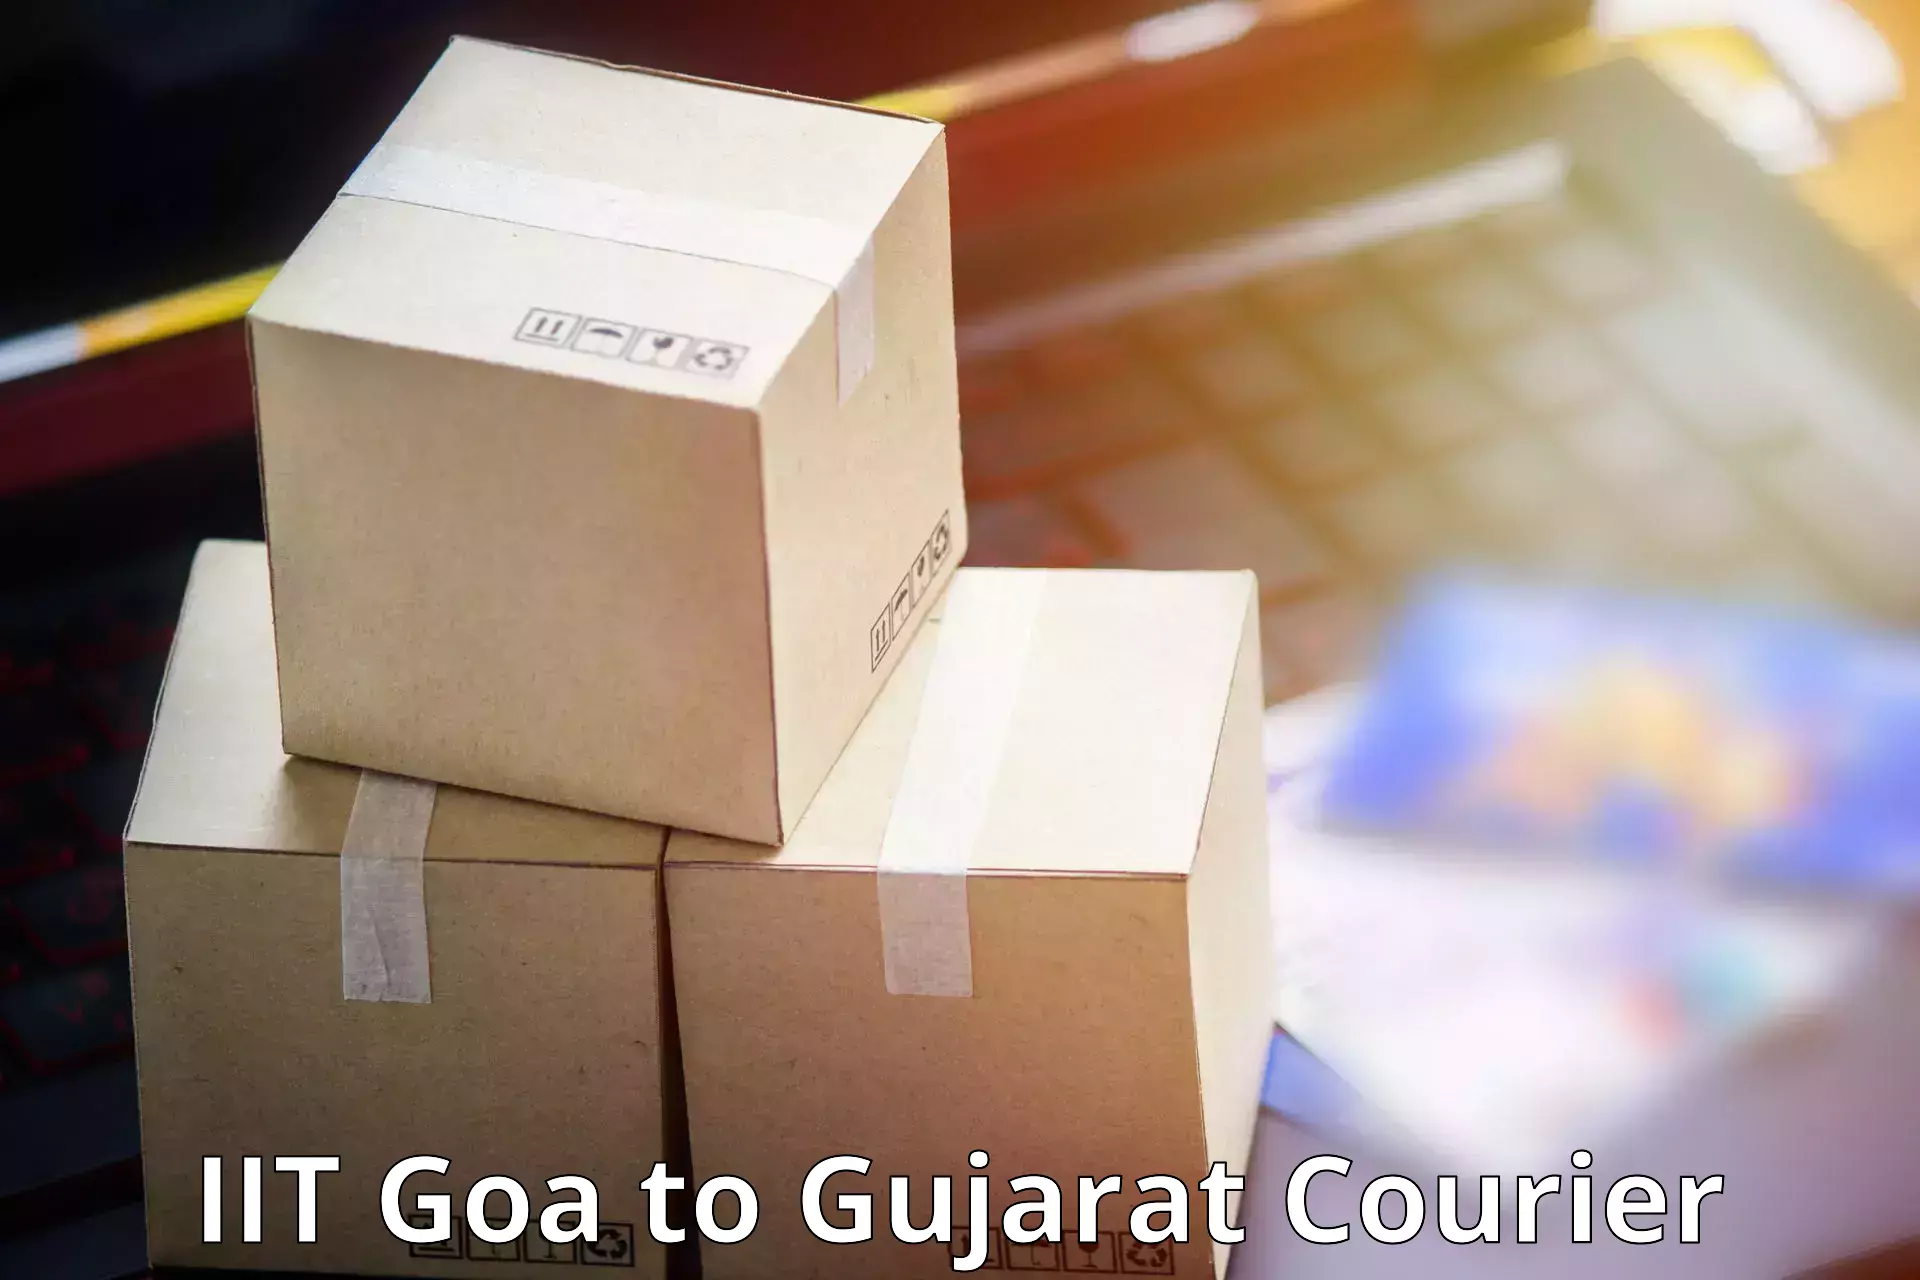 Easy access courier services in IIT Goa to Ahmedabad